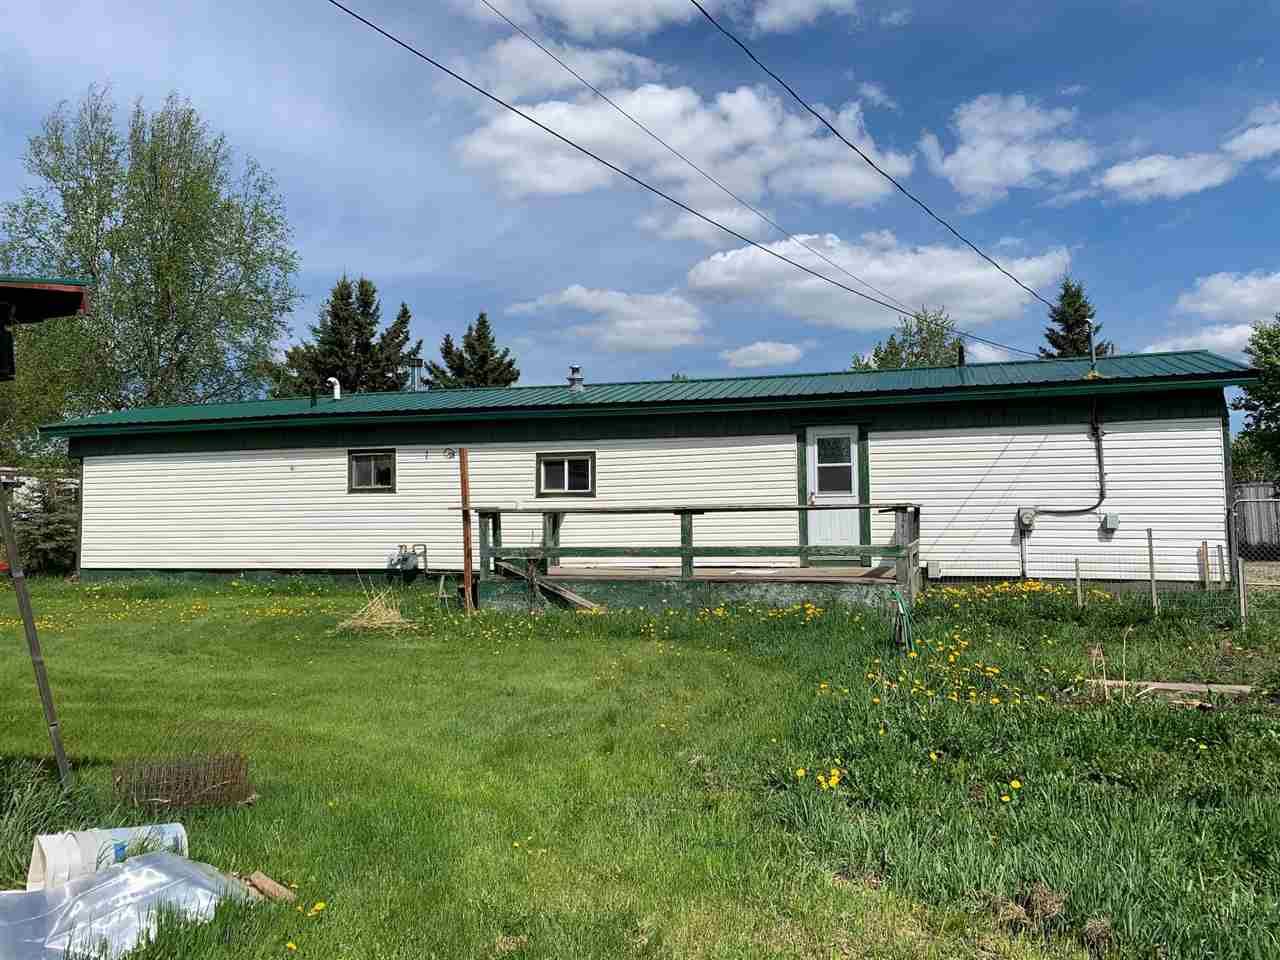 Photo 2: Photos: 10356 99 Street: Taylor Manufactured Home for sale (Fort St. John (Zone 60))  : MLS®# R2542502